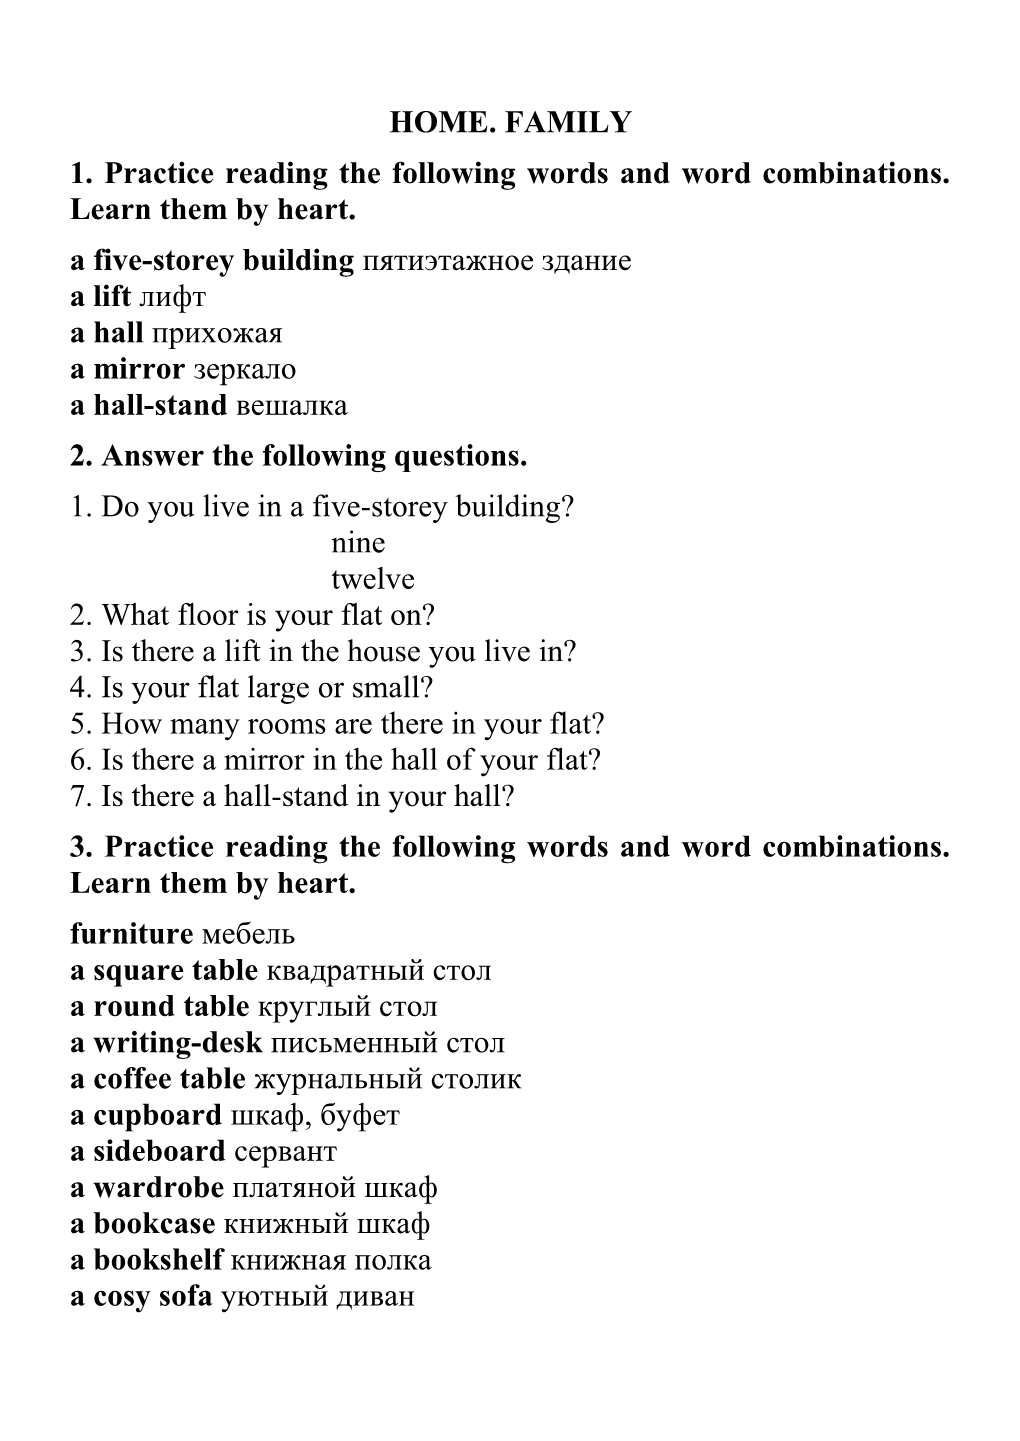 1. Practice Reading the Following Words and Word Combinations. Learn Them by Heart